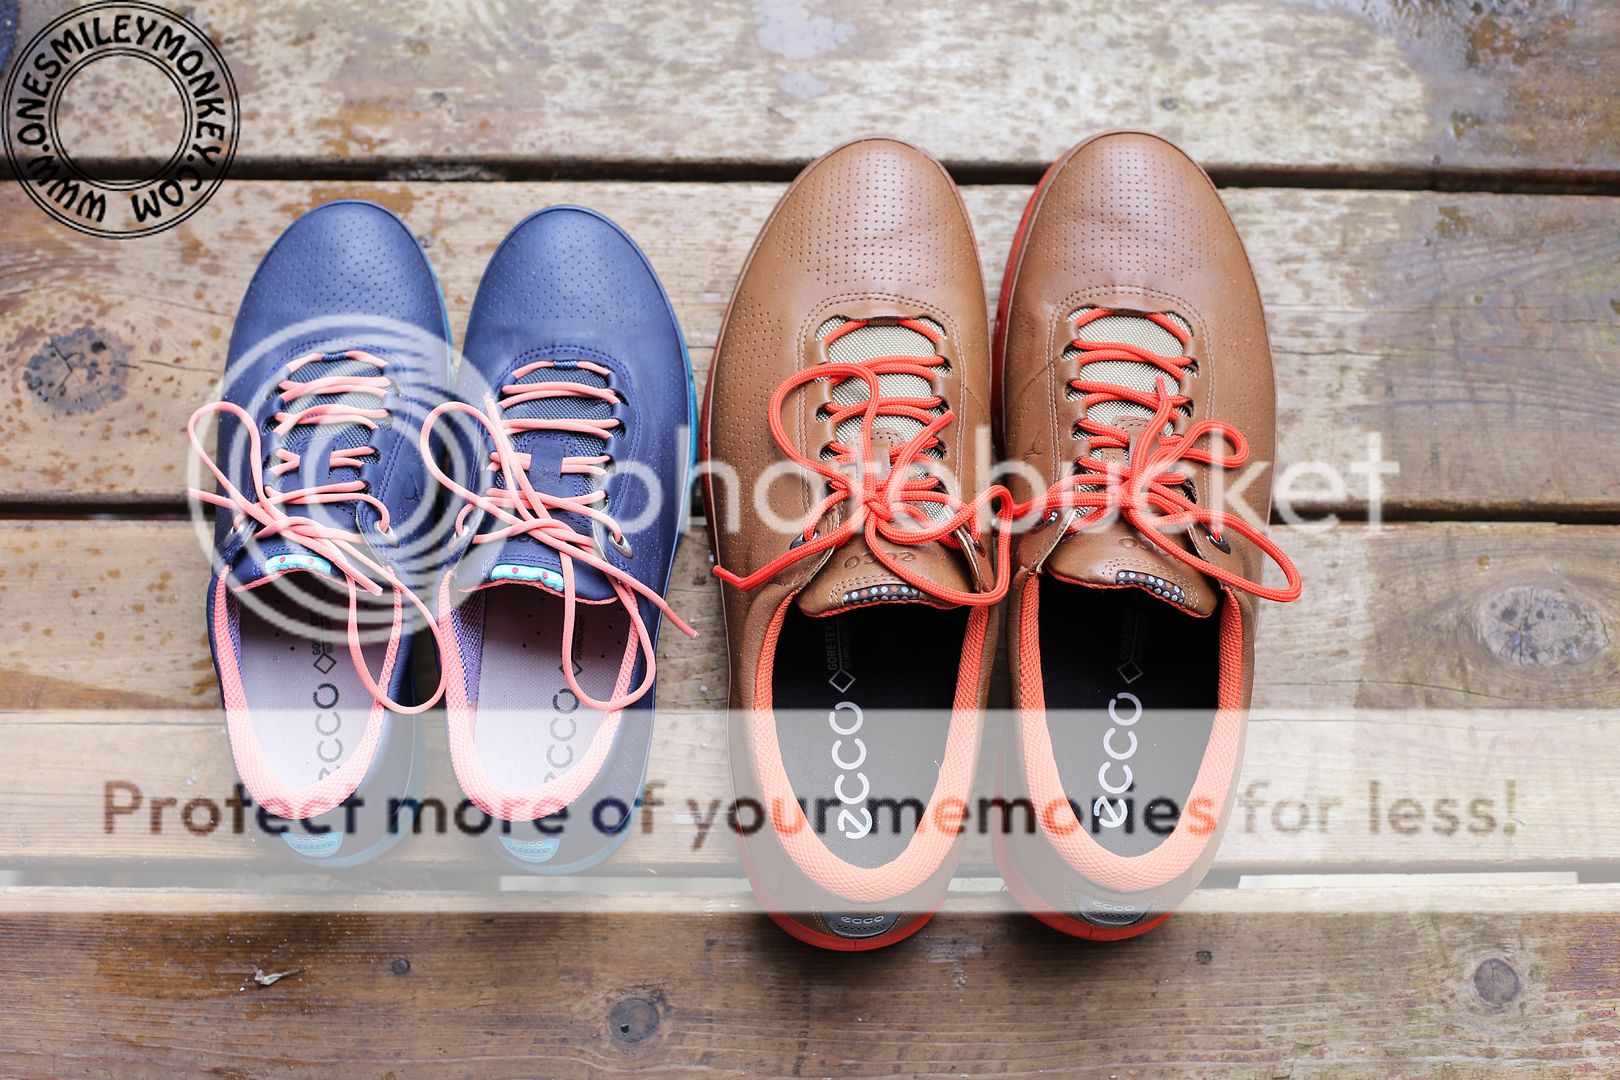 NEW ecco O2 Sneakers For Her and For Him {Review & Giveaway}